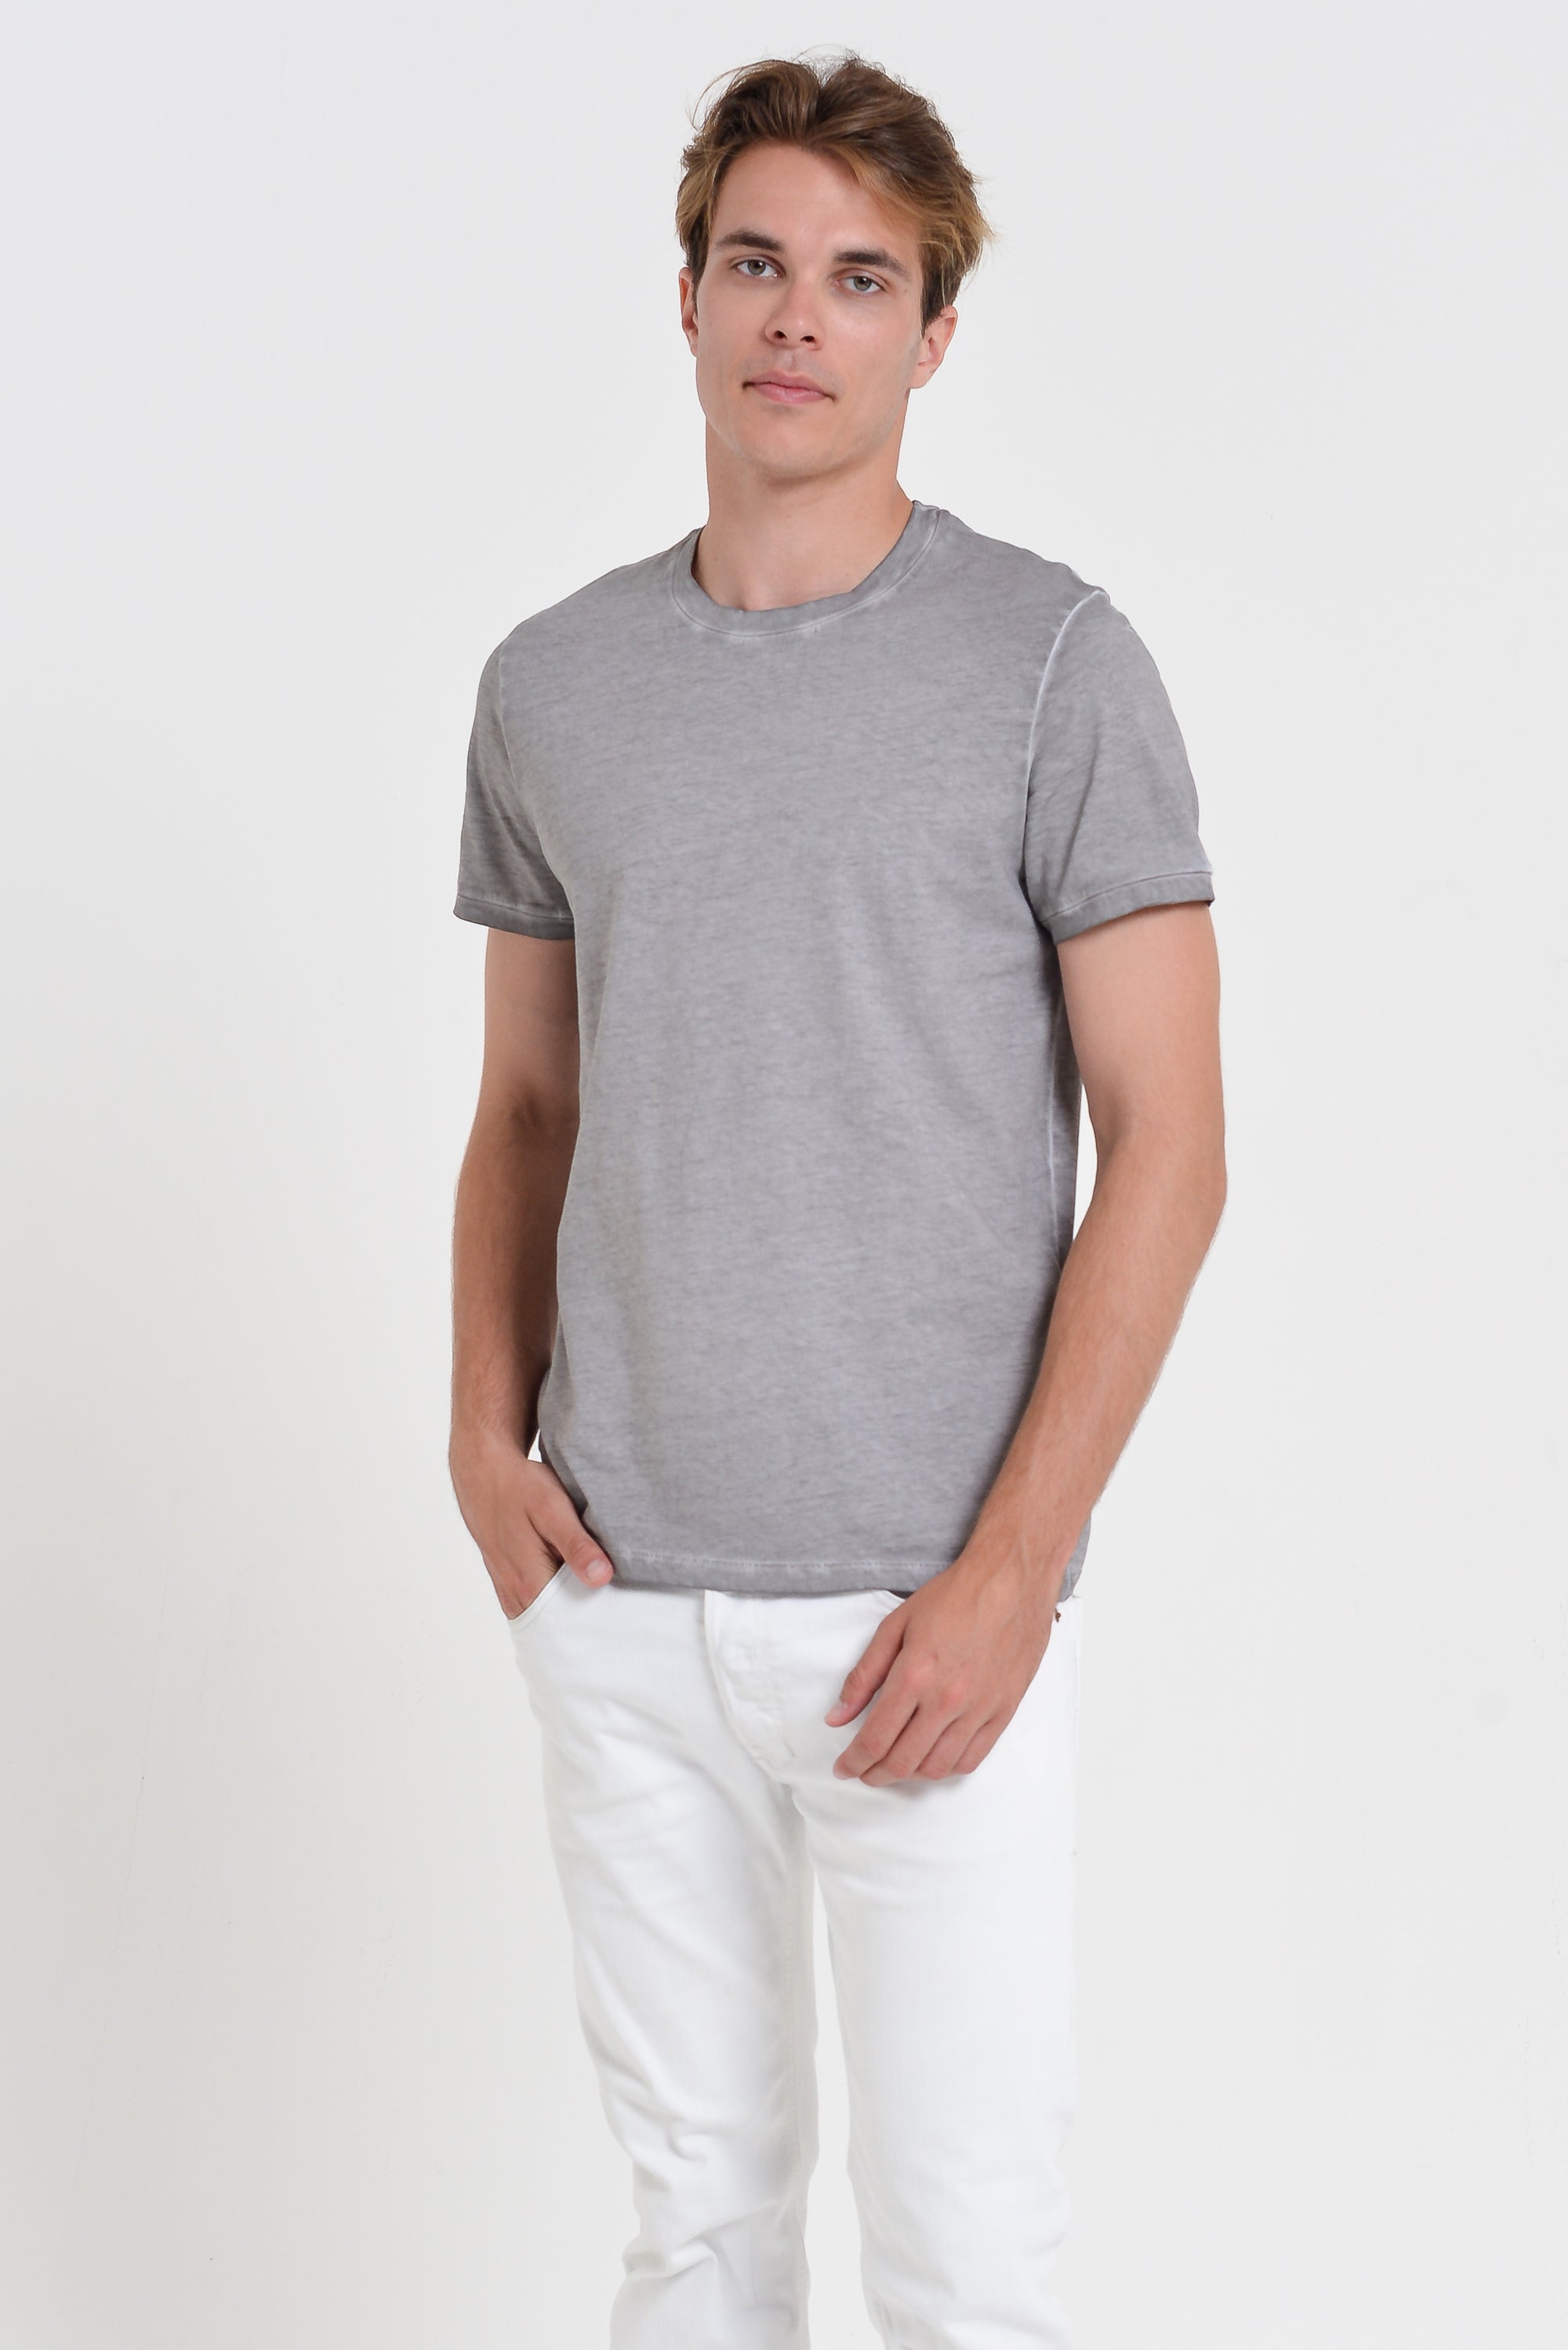 Smart Casual Cotton T-Shirt - Dolphin